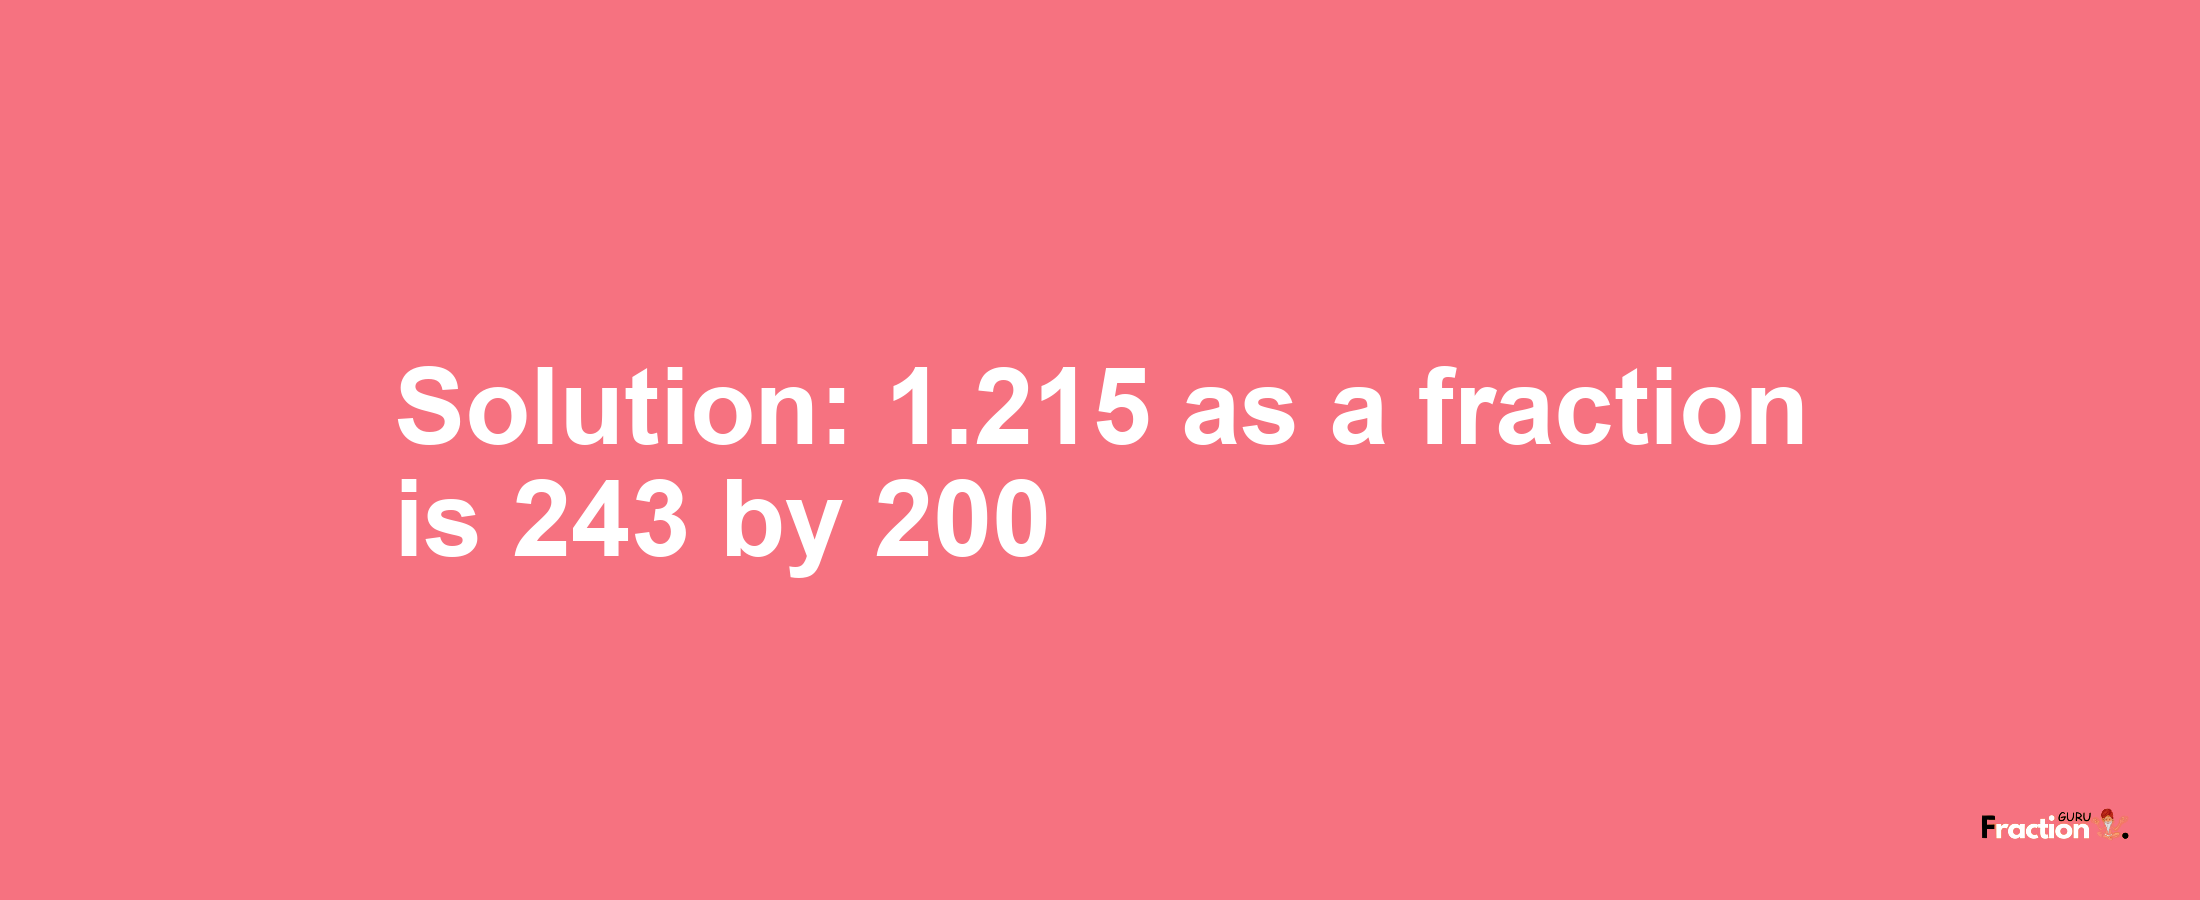 Solution:1.215 as a fraction is 243/200